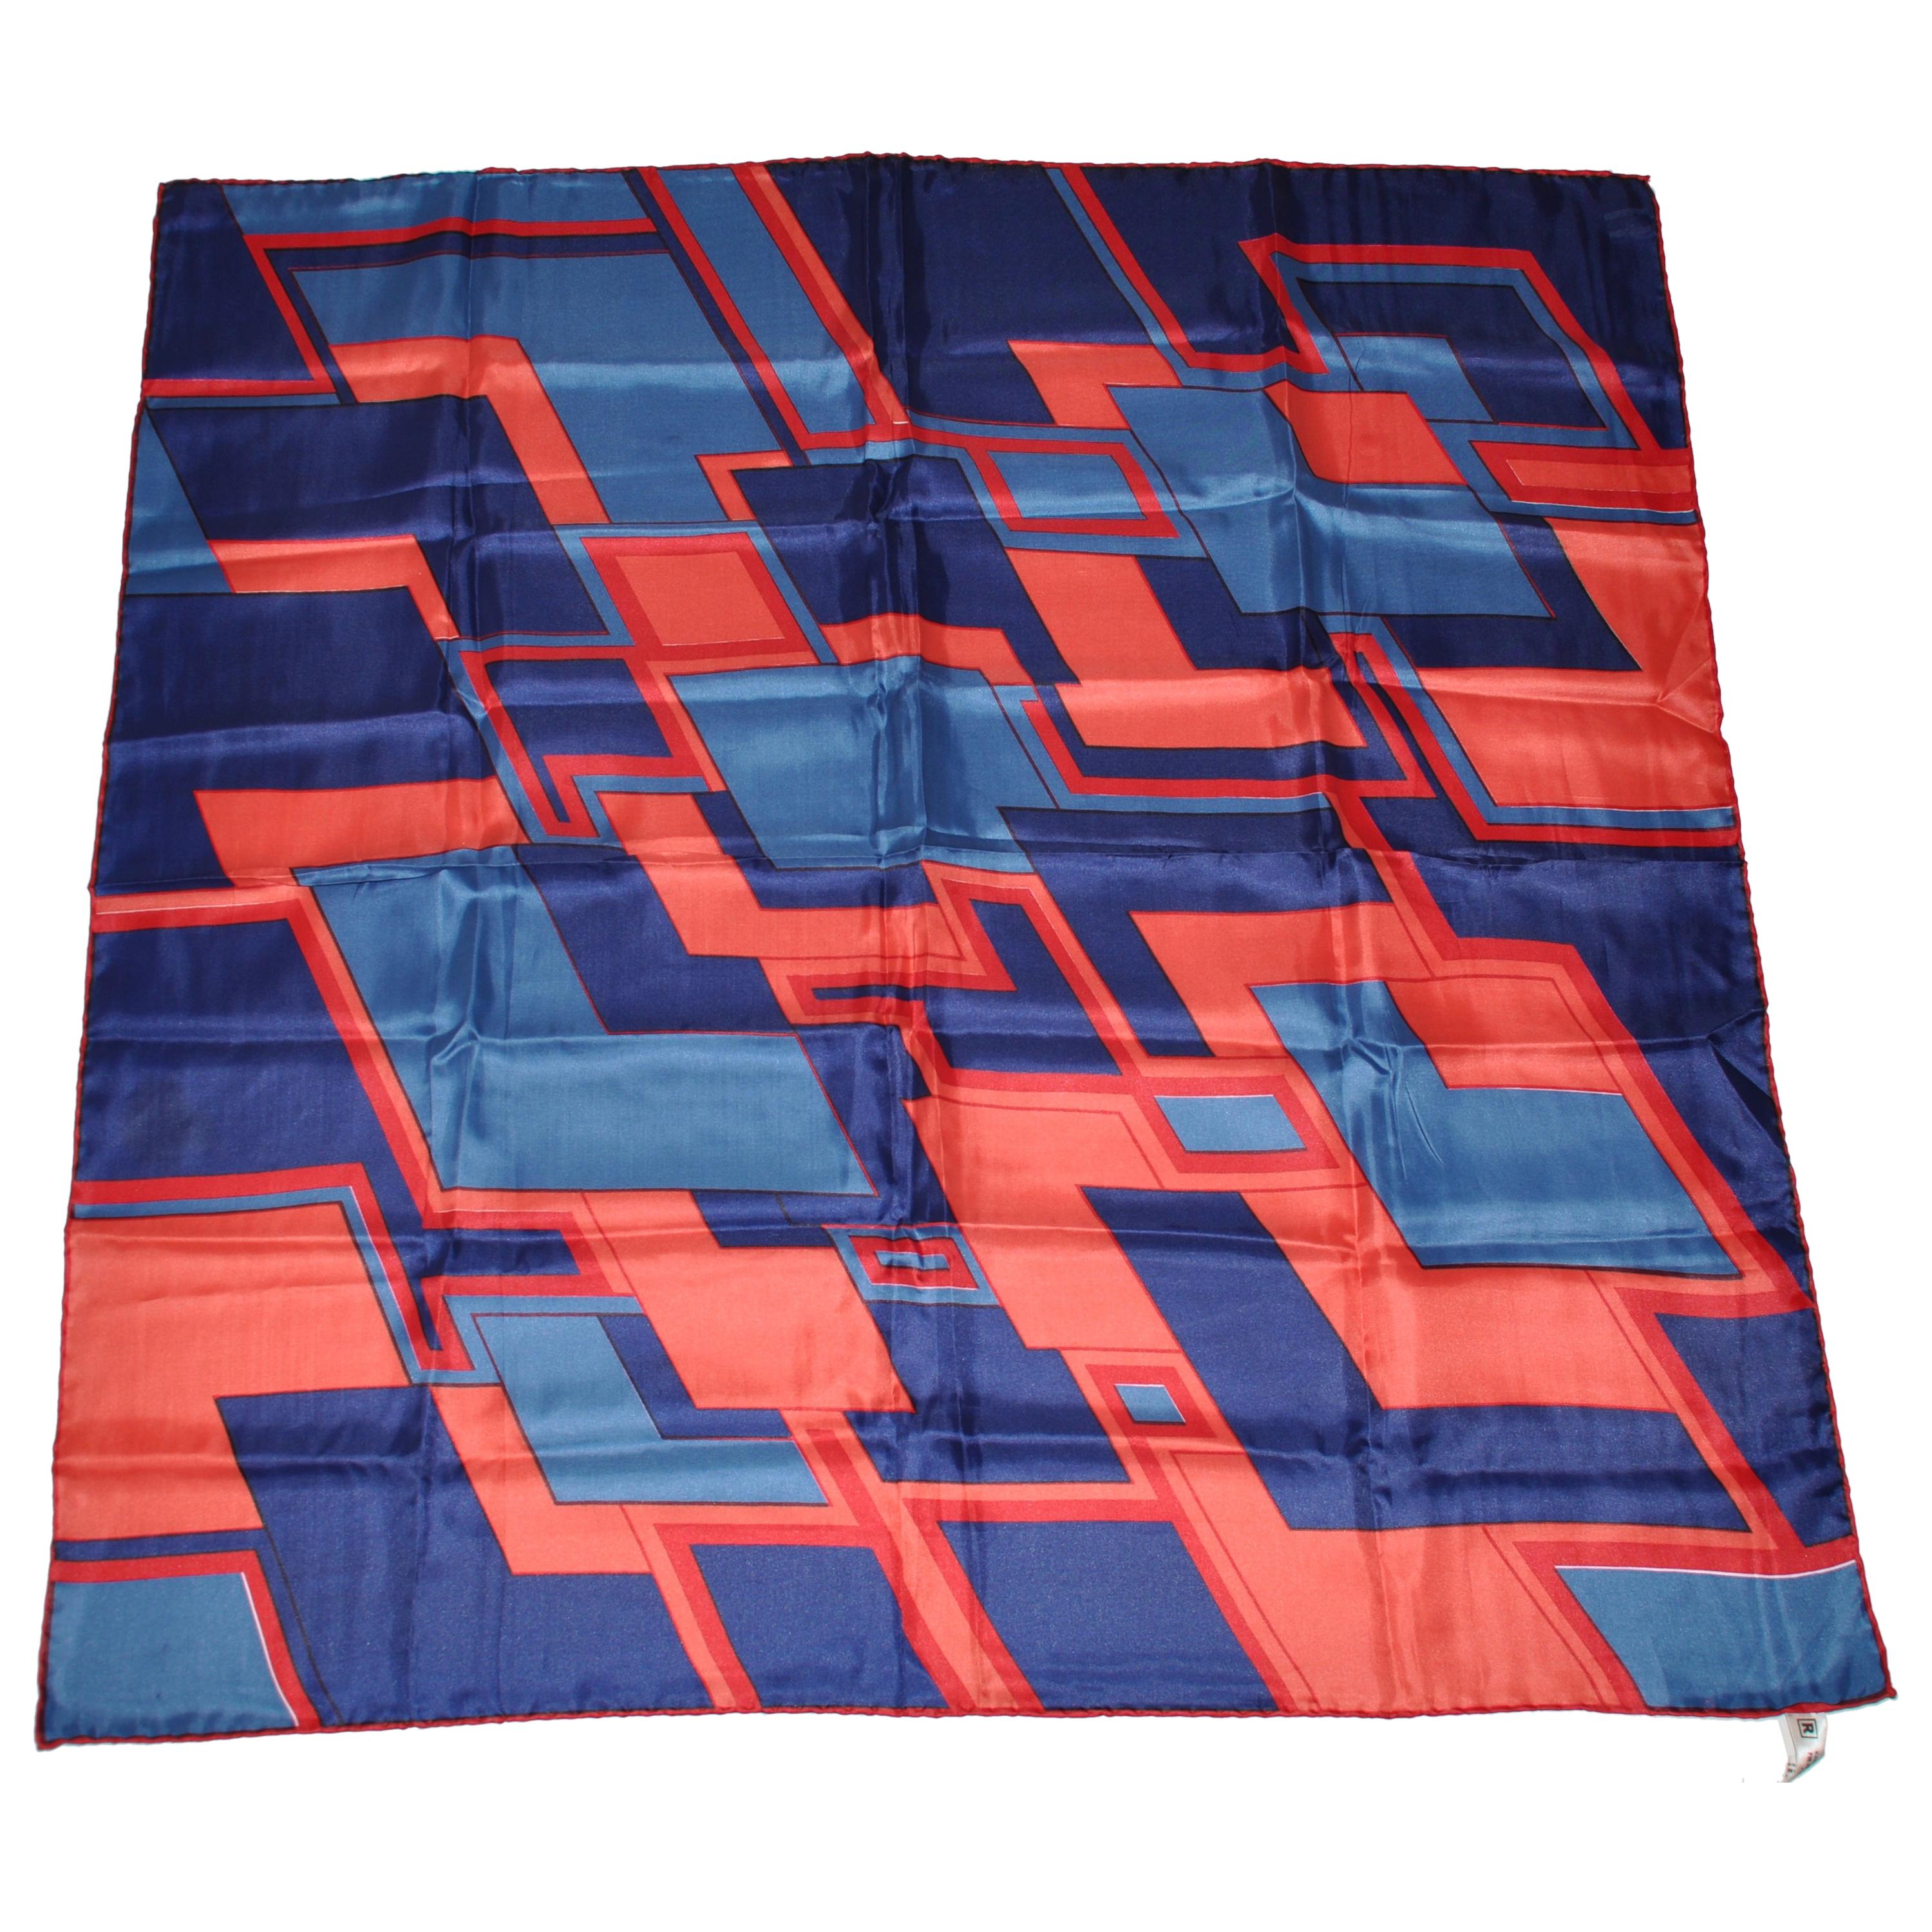 Red Border with Multicolor Abstract ZigZag Scarf